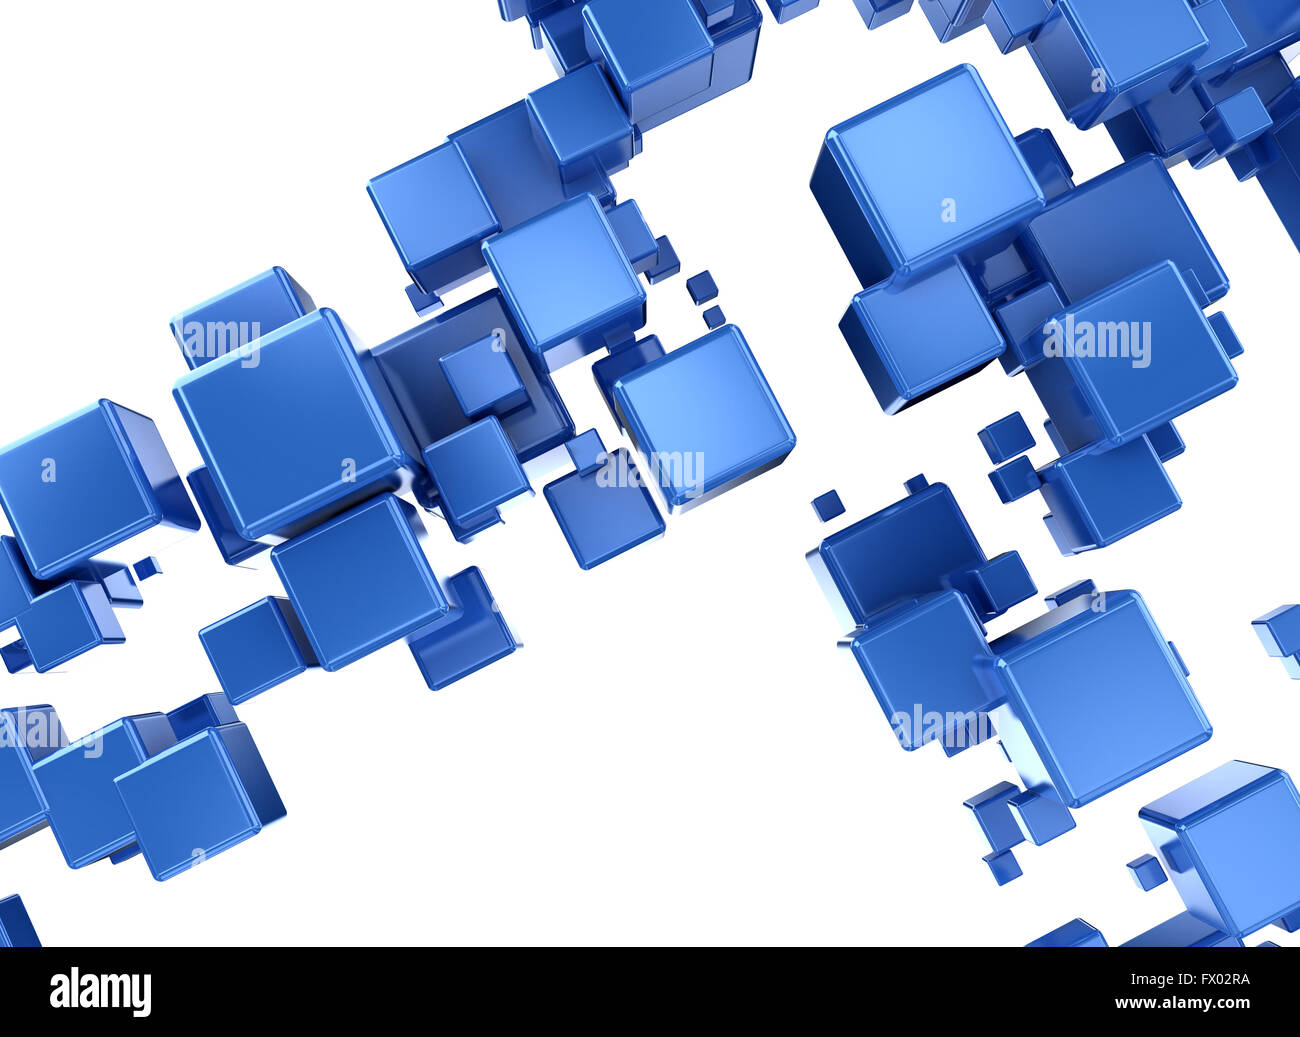 Abstract blue 3d digital cubes Stock Photo